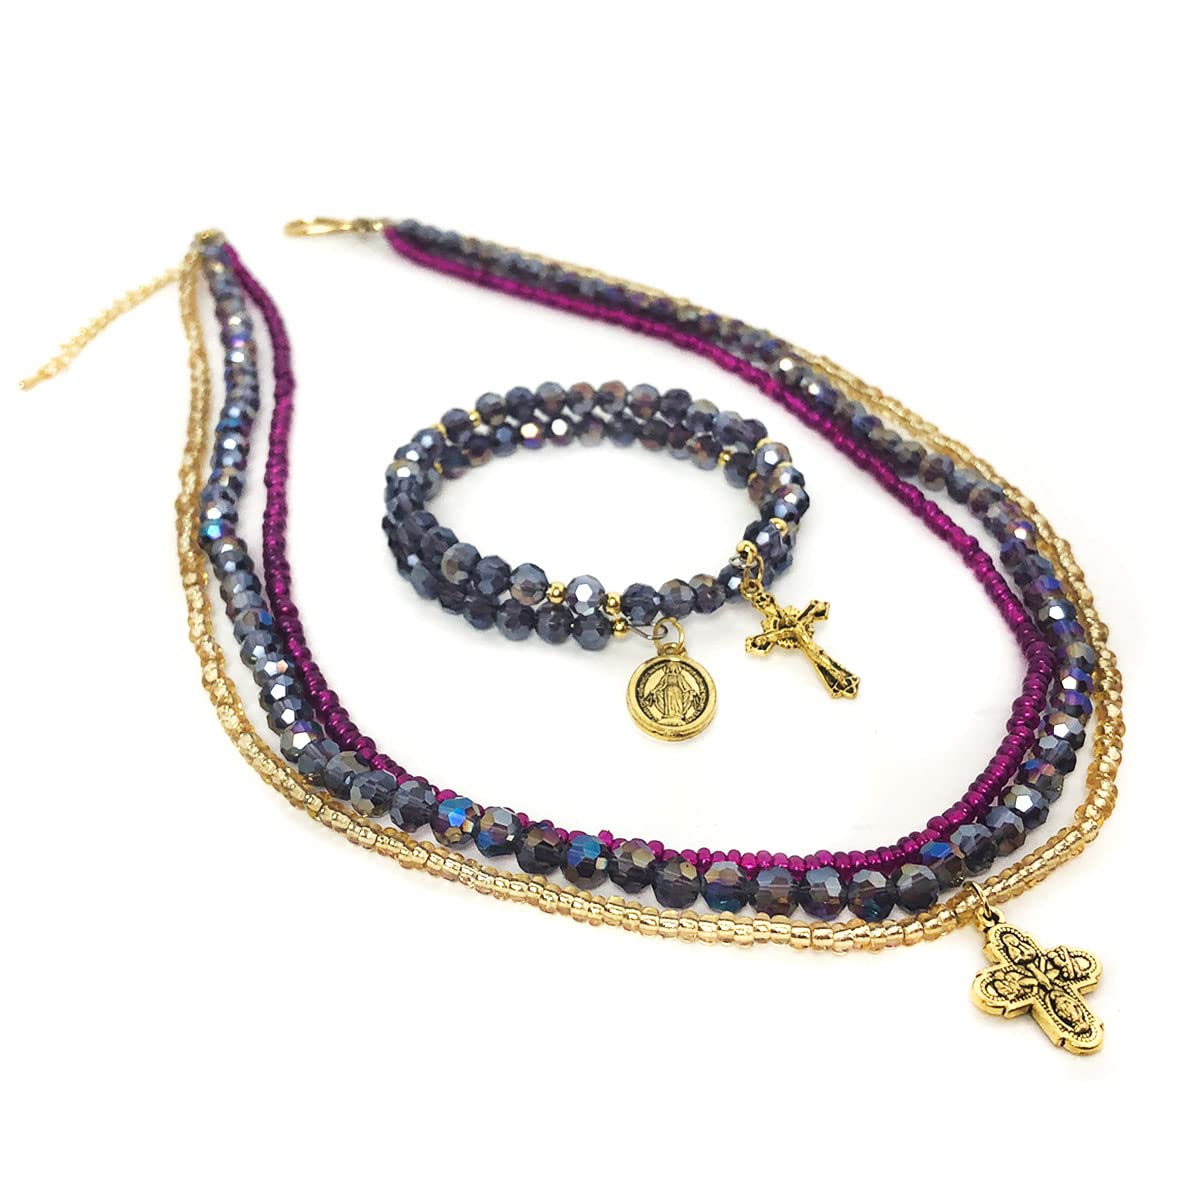 Four Way Medal Purple Crystal and Seed Bead 3 Layer Necklace & Catholic Bracelet Set by DALIA LORRAINE